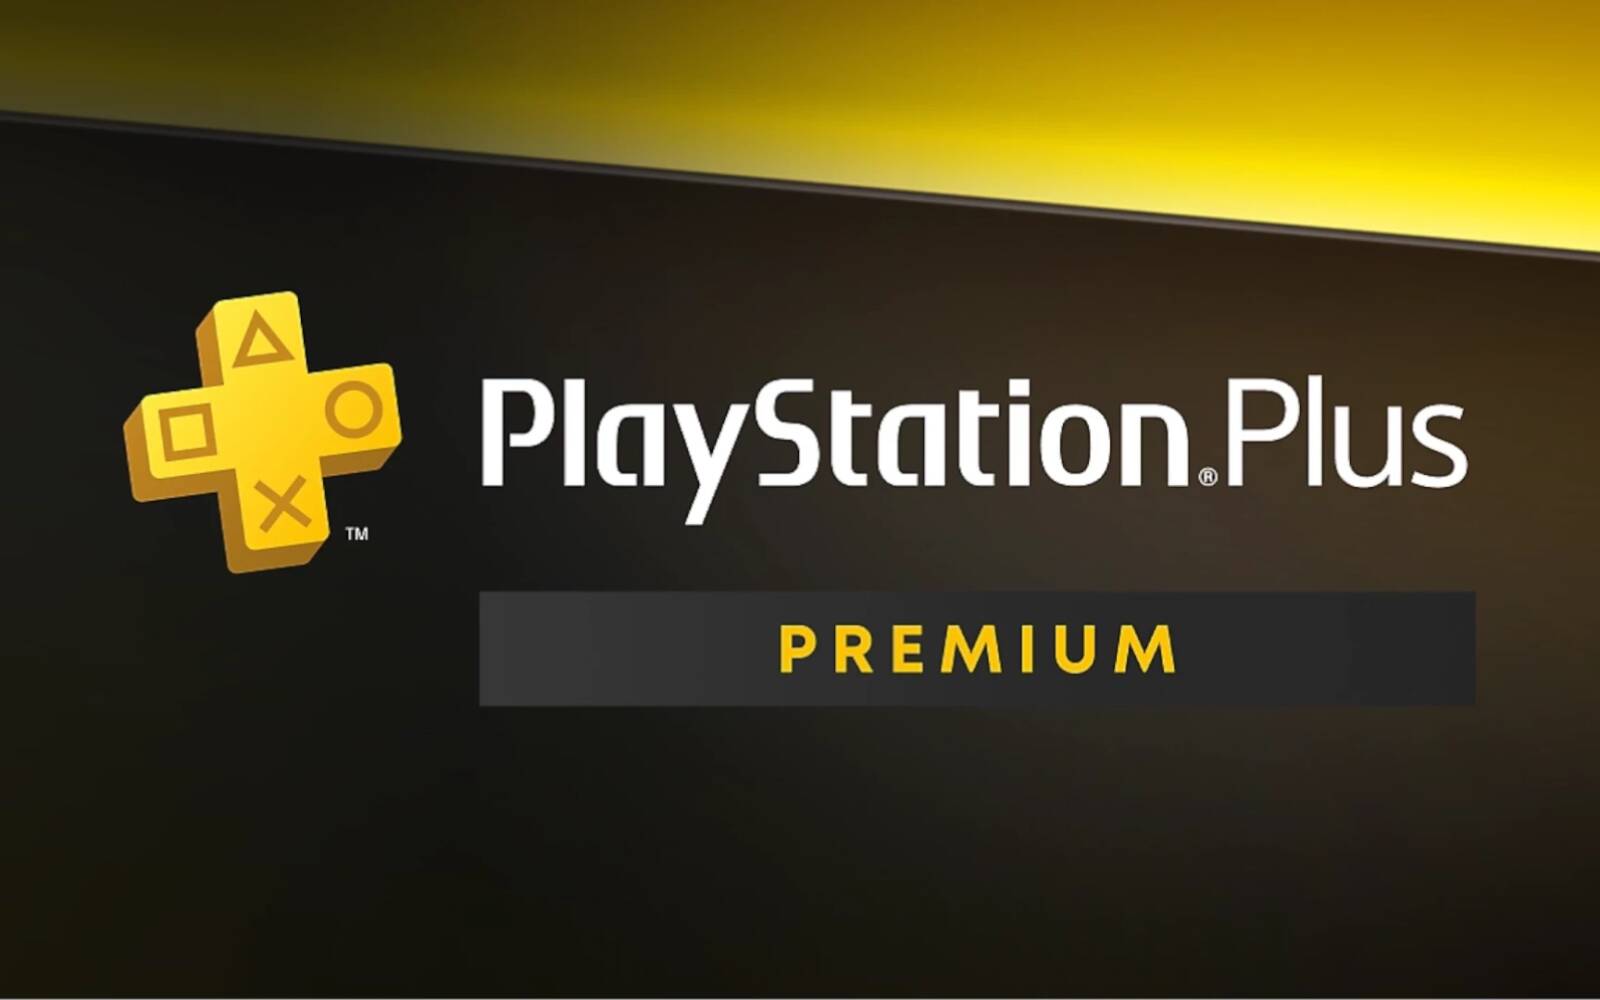 Games from Rockstar Games and Konami can be included in PlayStation Plus Premium